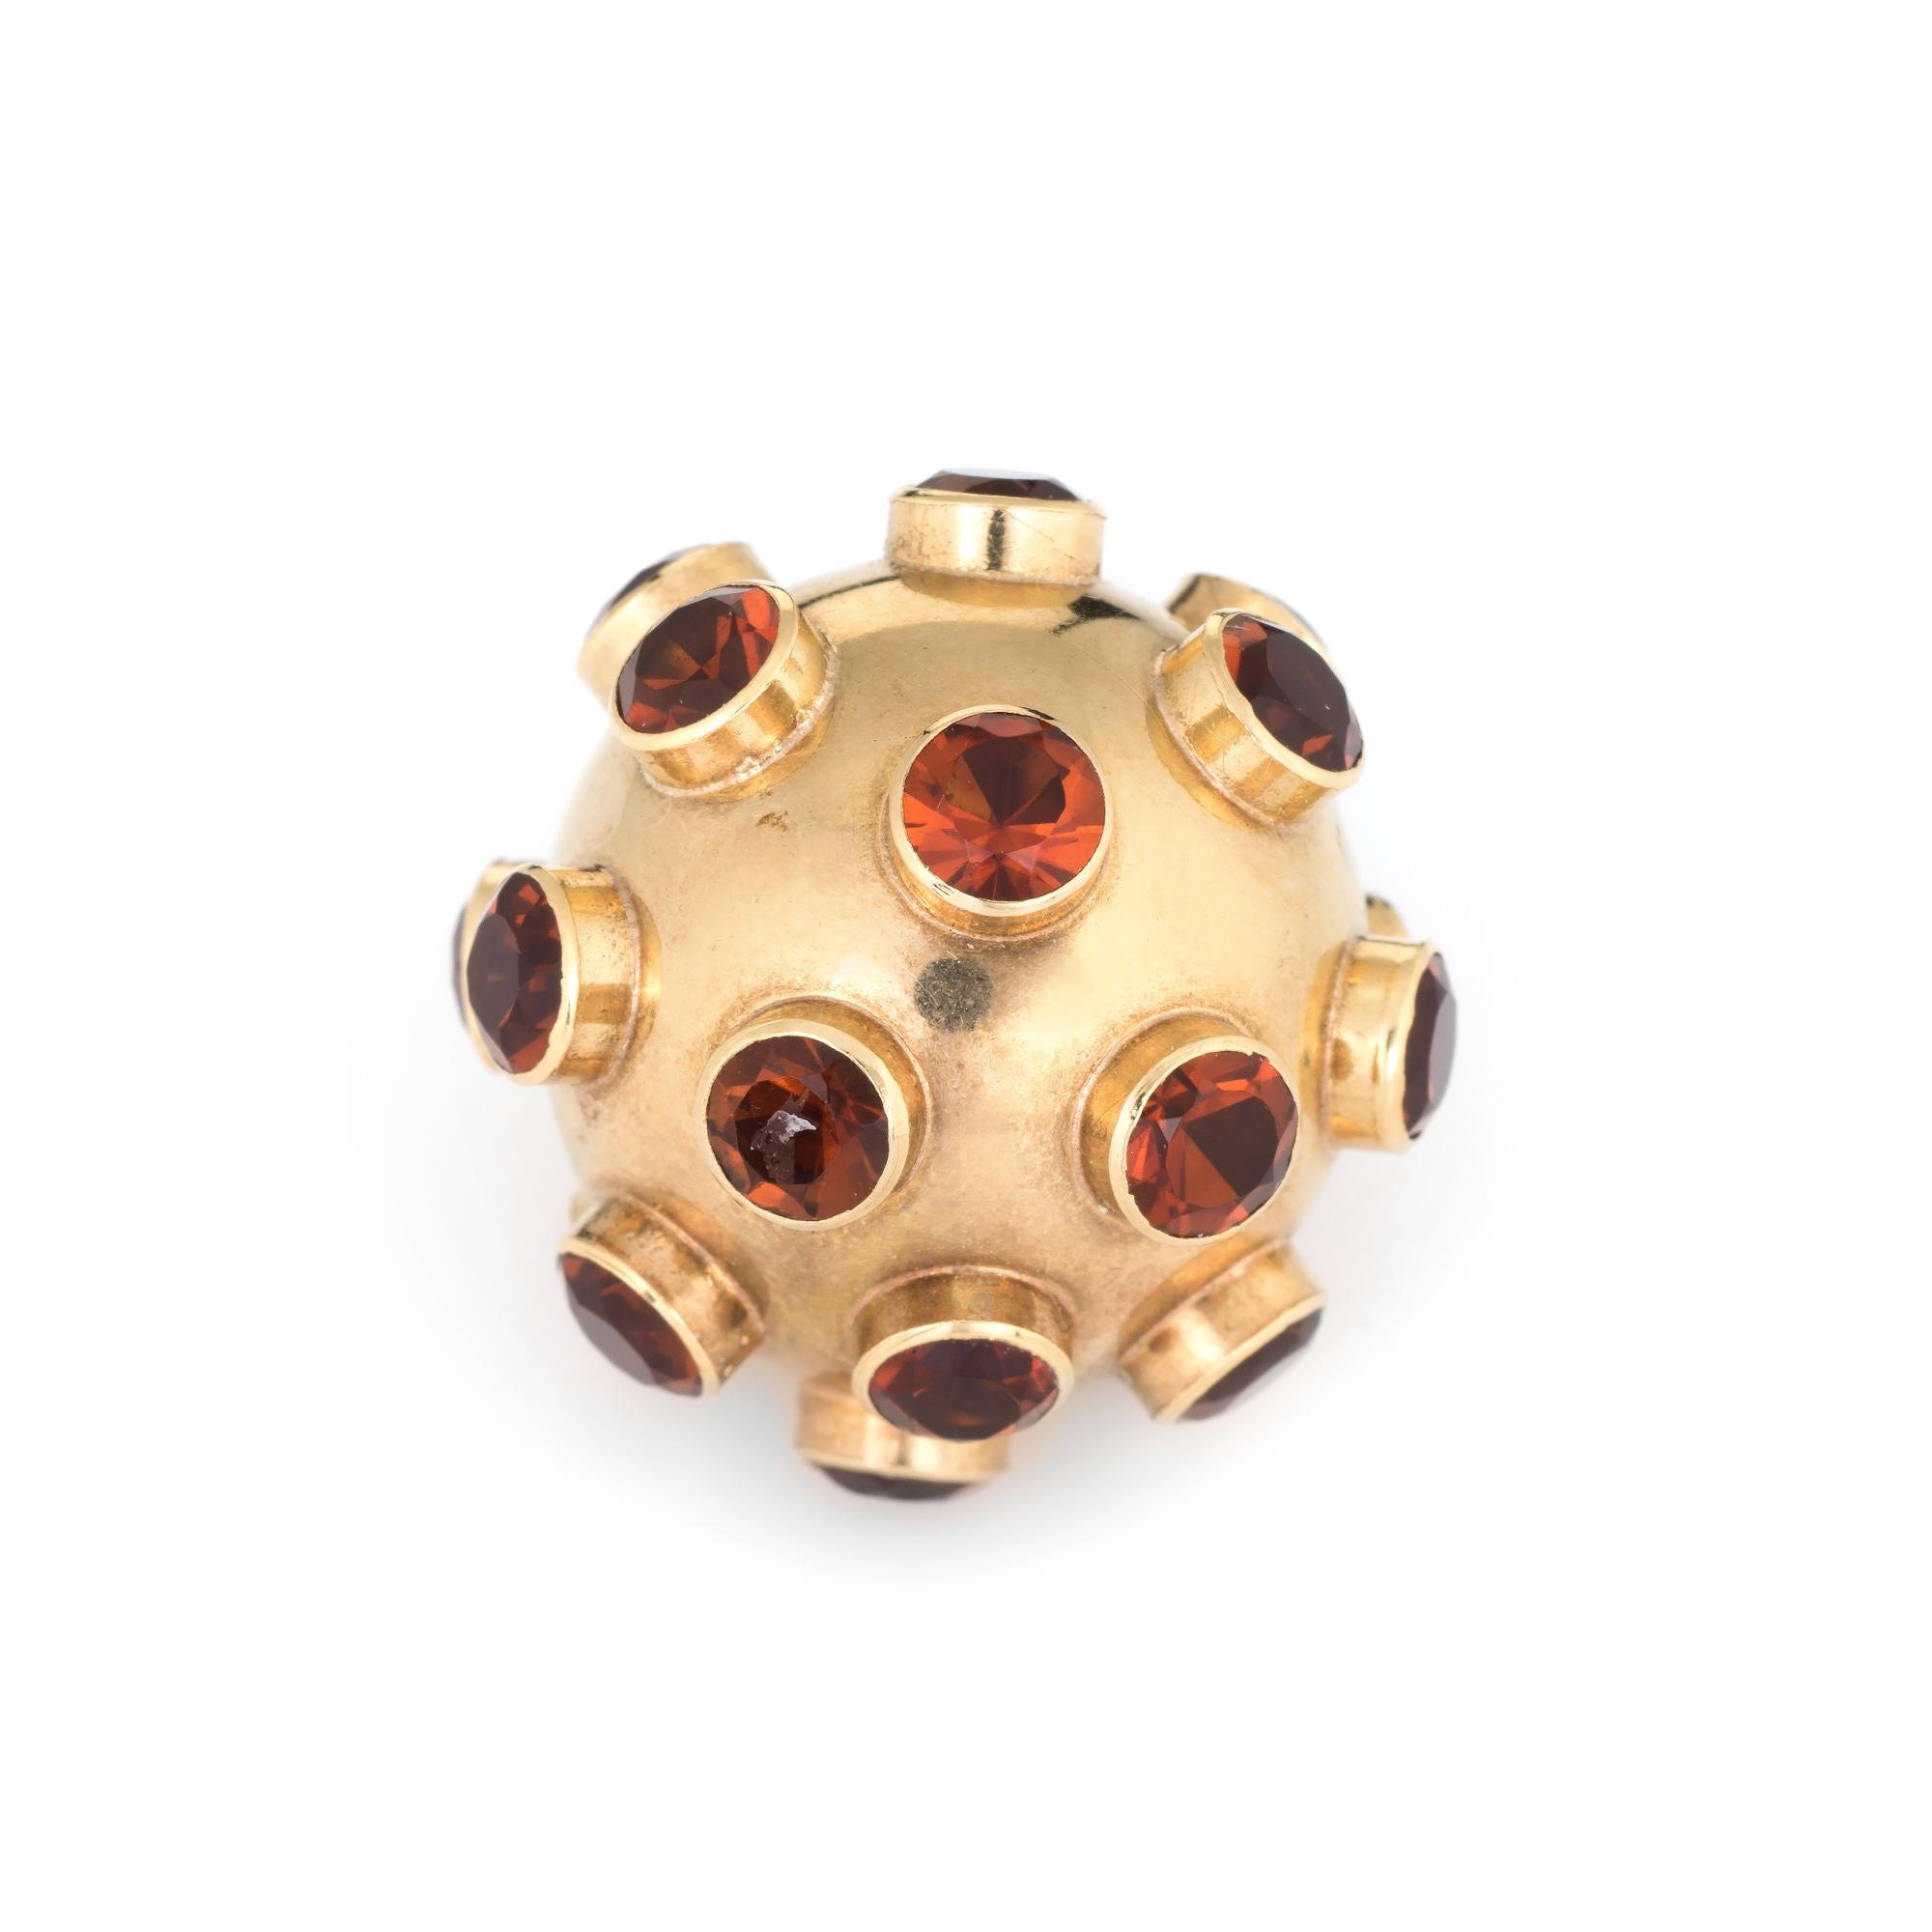 Ornate H Stern sputnik garnet pendant (circa 1950s to 1960s), crafted in 18 karat yellow gold. 

Garnets are uniform in size with each measuring 4mm. The total estimated weight is 6 carats. The garnets are in excellent condition and free of cracks